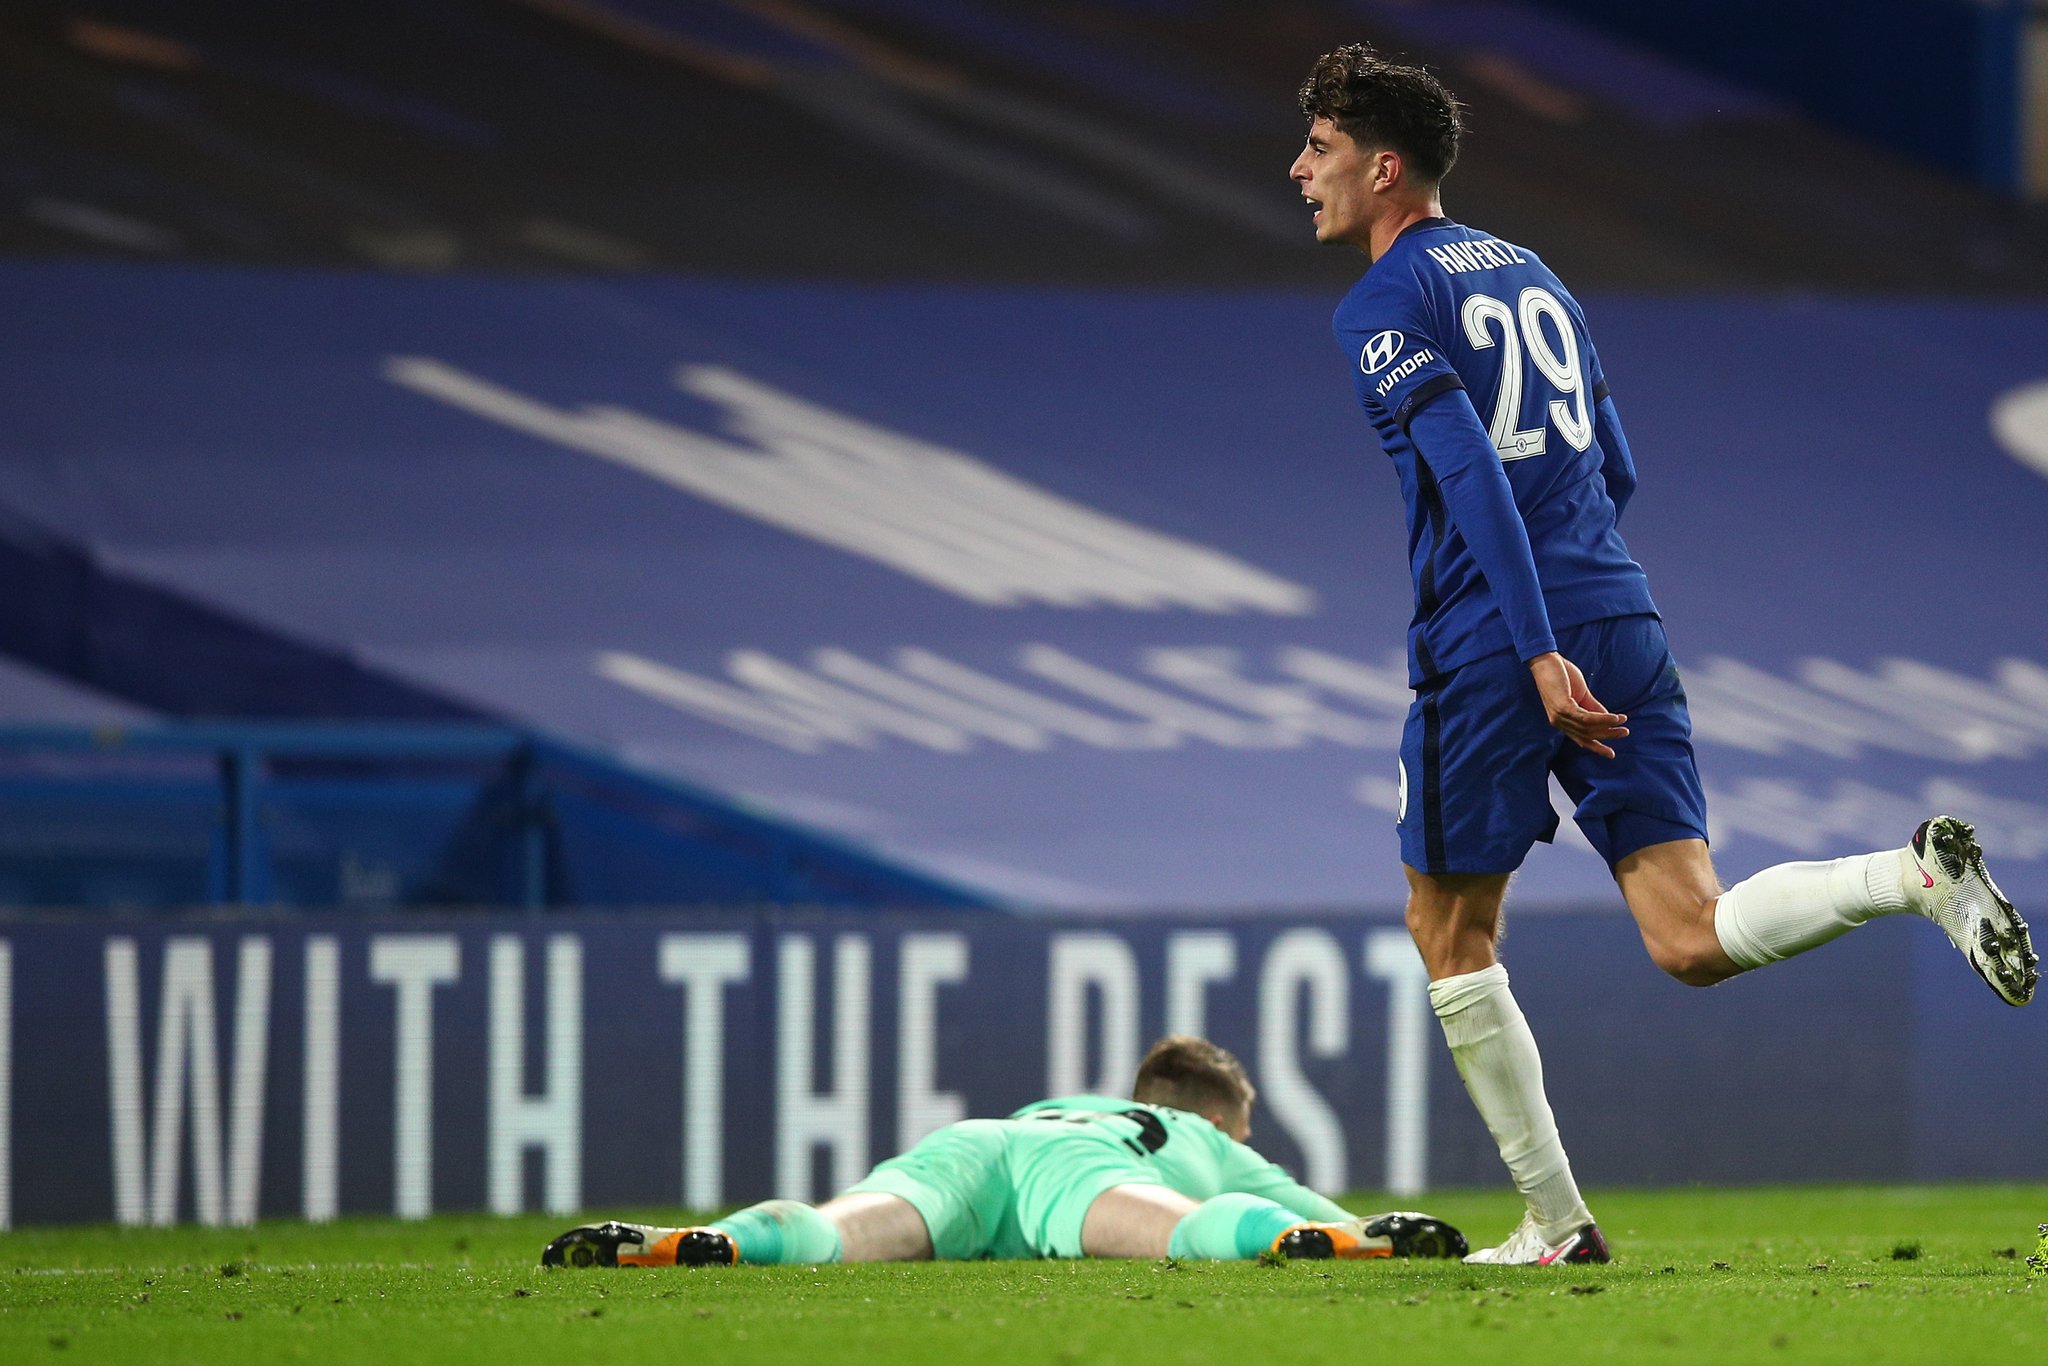 Chelsea star Kai Havertz is happy to play where needed as he looks to kick on his career at the club..